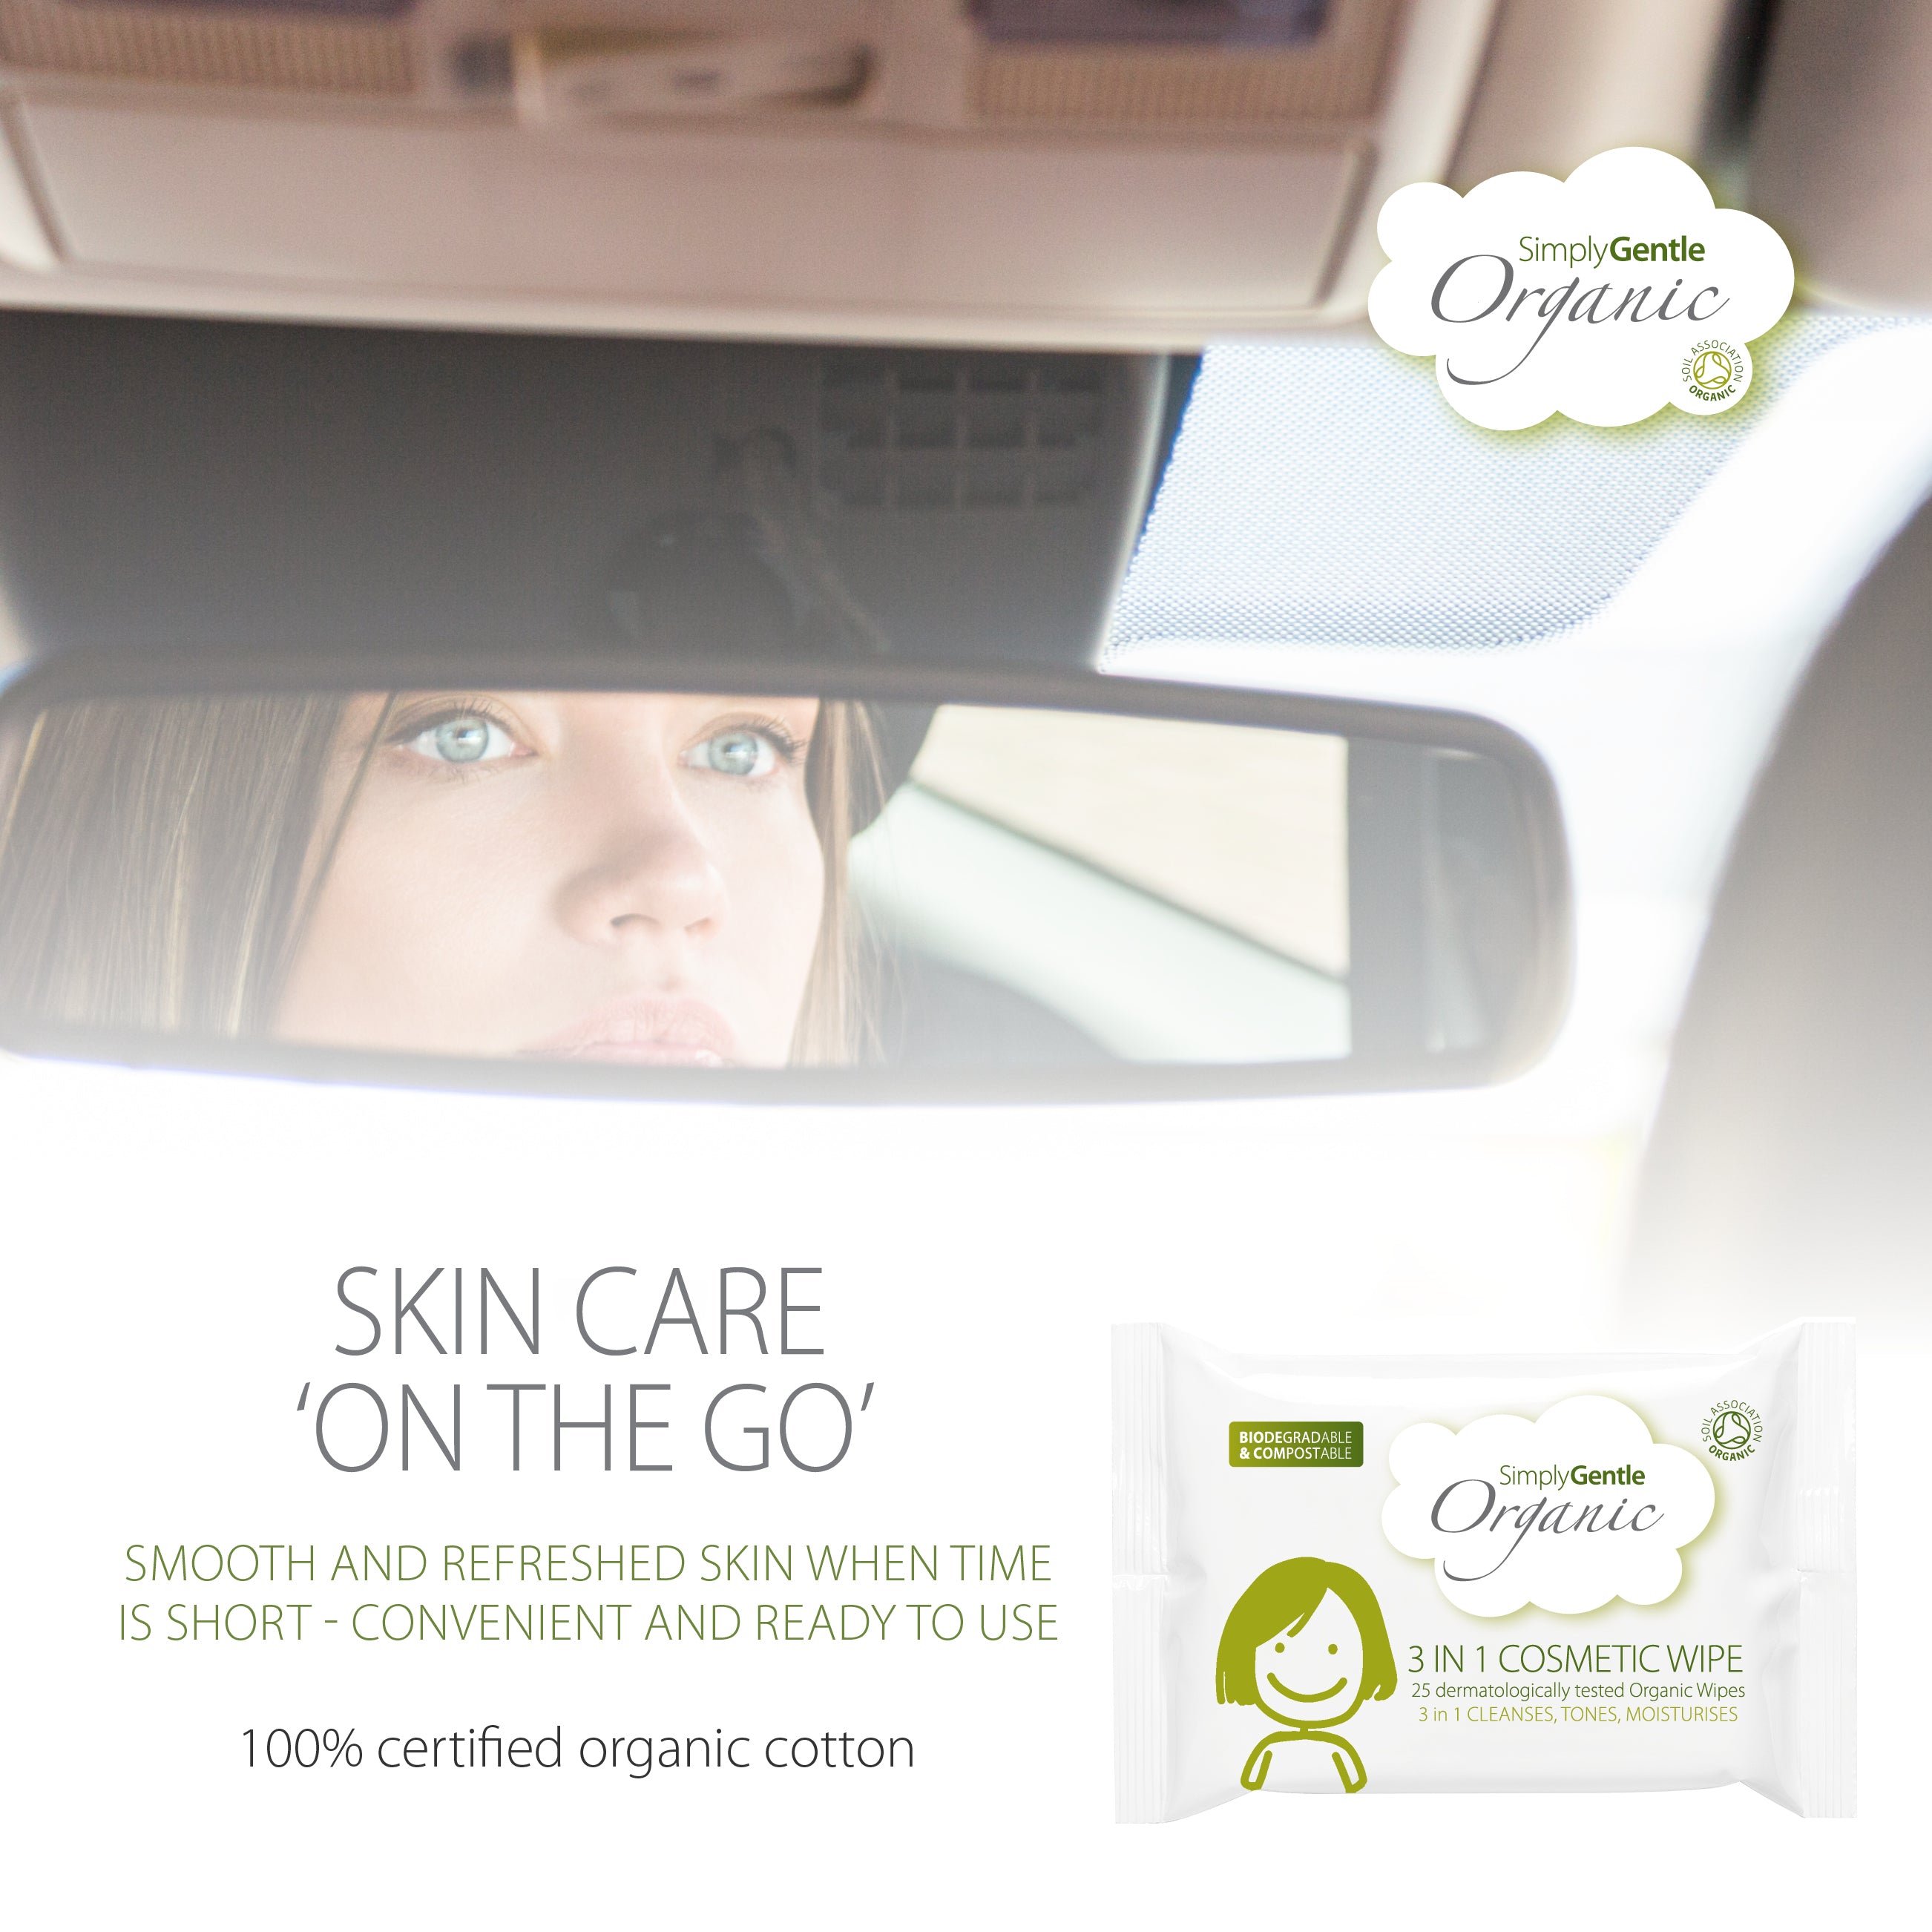 Simply Gentle Organic 3 in 1 Cosmetic Wipe made with a gentle organic lotion containing aloe vera, lavender oil, and a range of flower oils, our 3 in 1 Cosmetic Wipes cleanse, tone, and moisturise. Soft to use, and with a beautiful, natural fragrance, they are dermatologically tested. 100% certified organic cotton. Soil Association approved. Resealable packs, convenient and ready to use when your 'on the go'